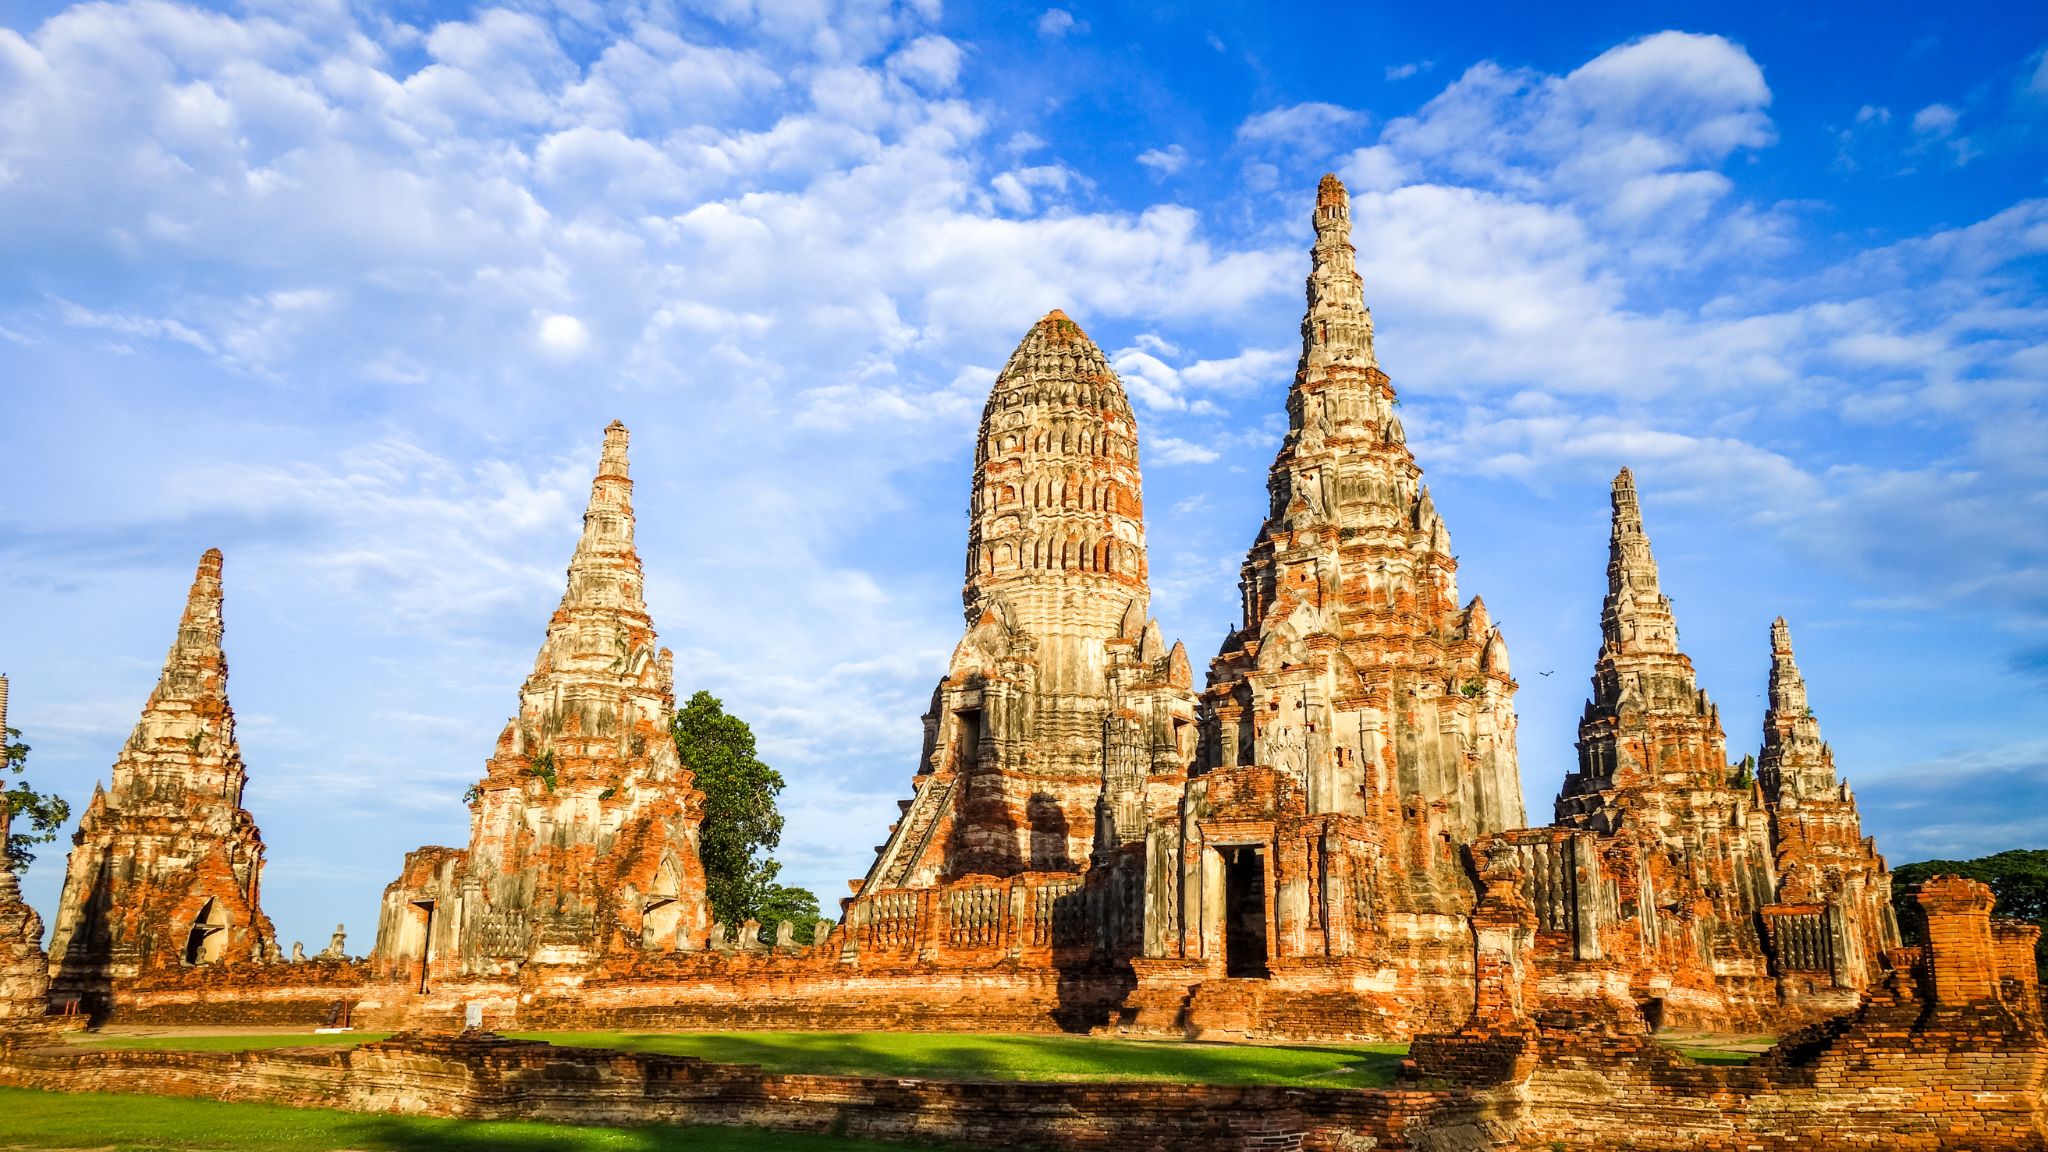 Day 4 Visit The Historical Former Capital Of Thailand Ayutthaya